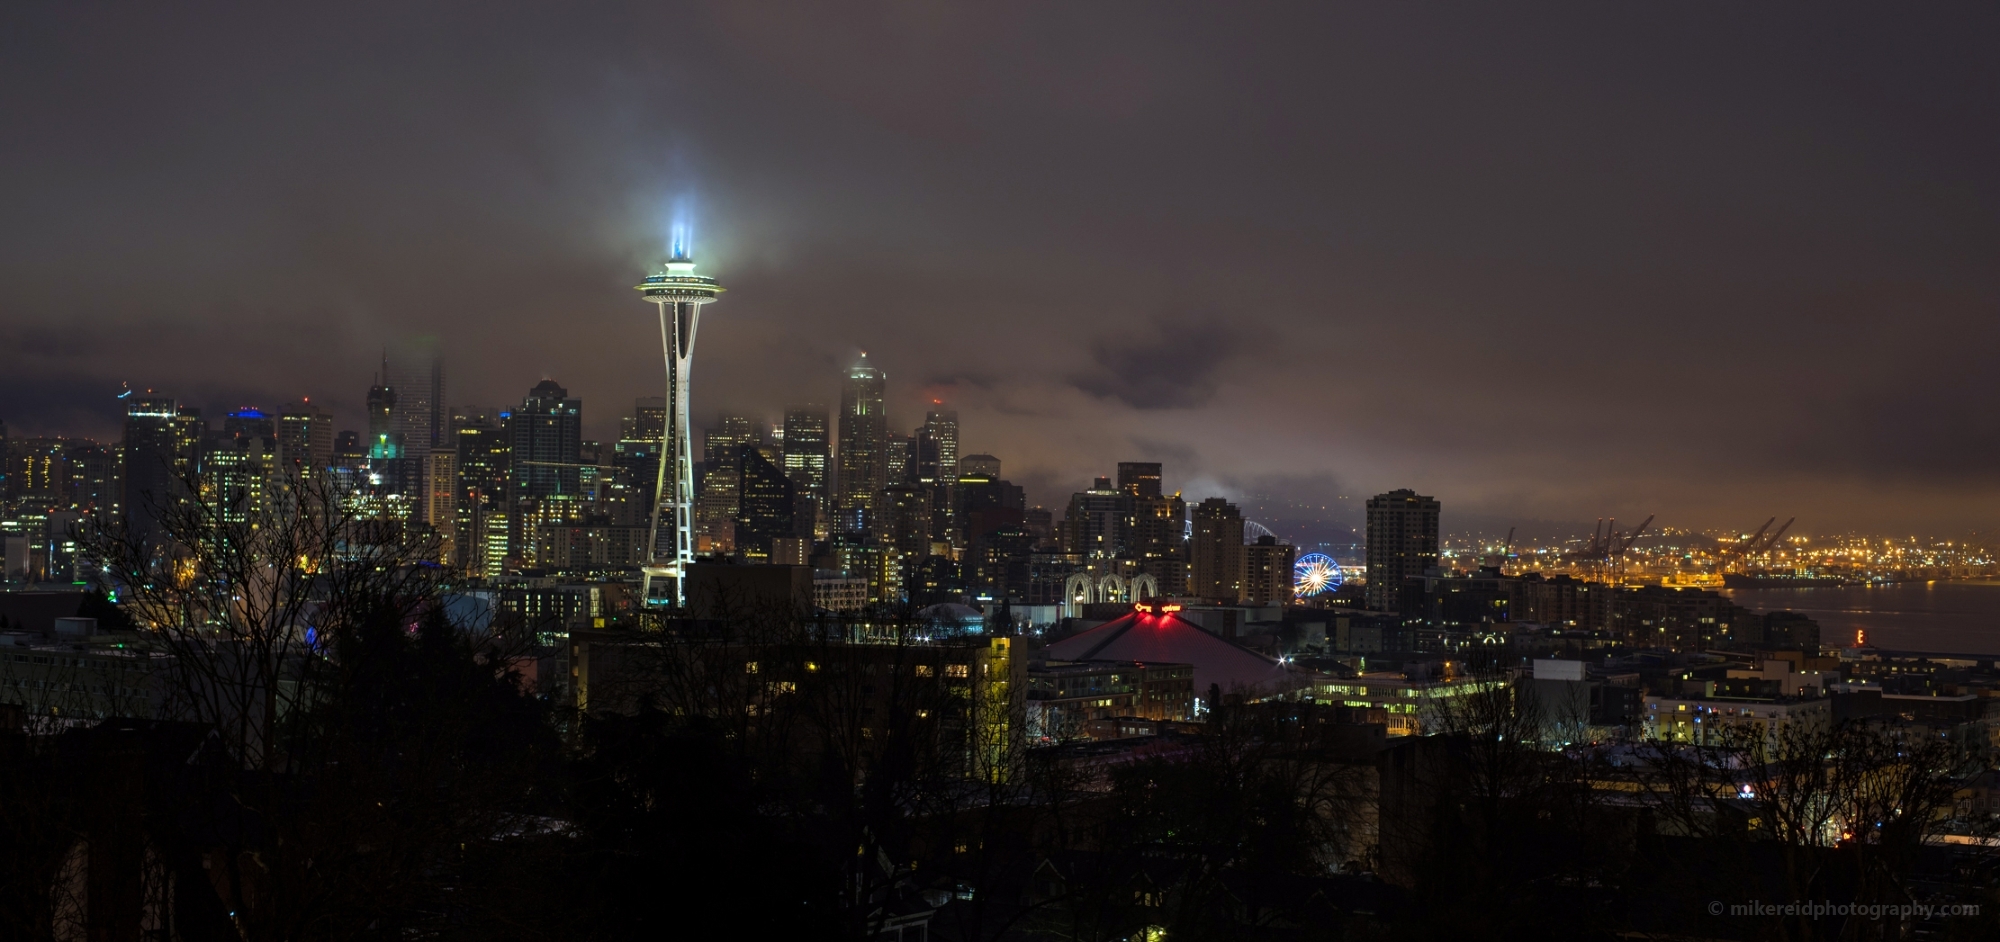 Seattle Fog City.jpg Photography from Seattles Kerry Park is iconic. Everyone wants to go there when they visit to take That Shot. I love being there at sunrise or sunset to see how the light is highlighting the city and Mount Rainier. Contact me for custom Seattle photography tours.